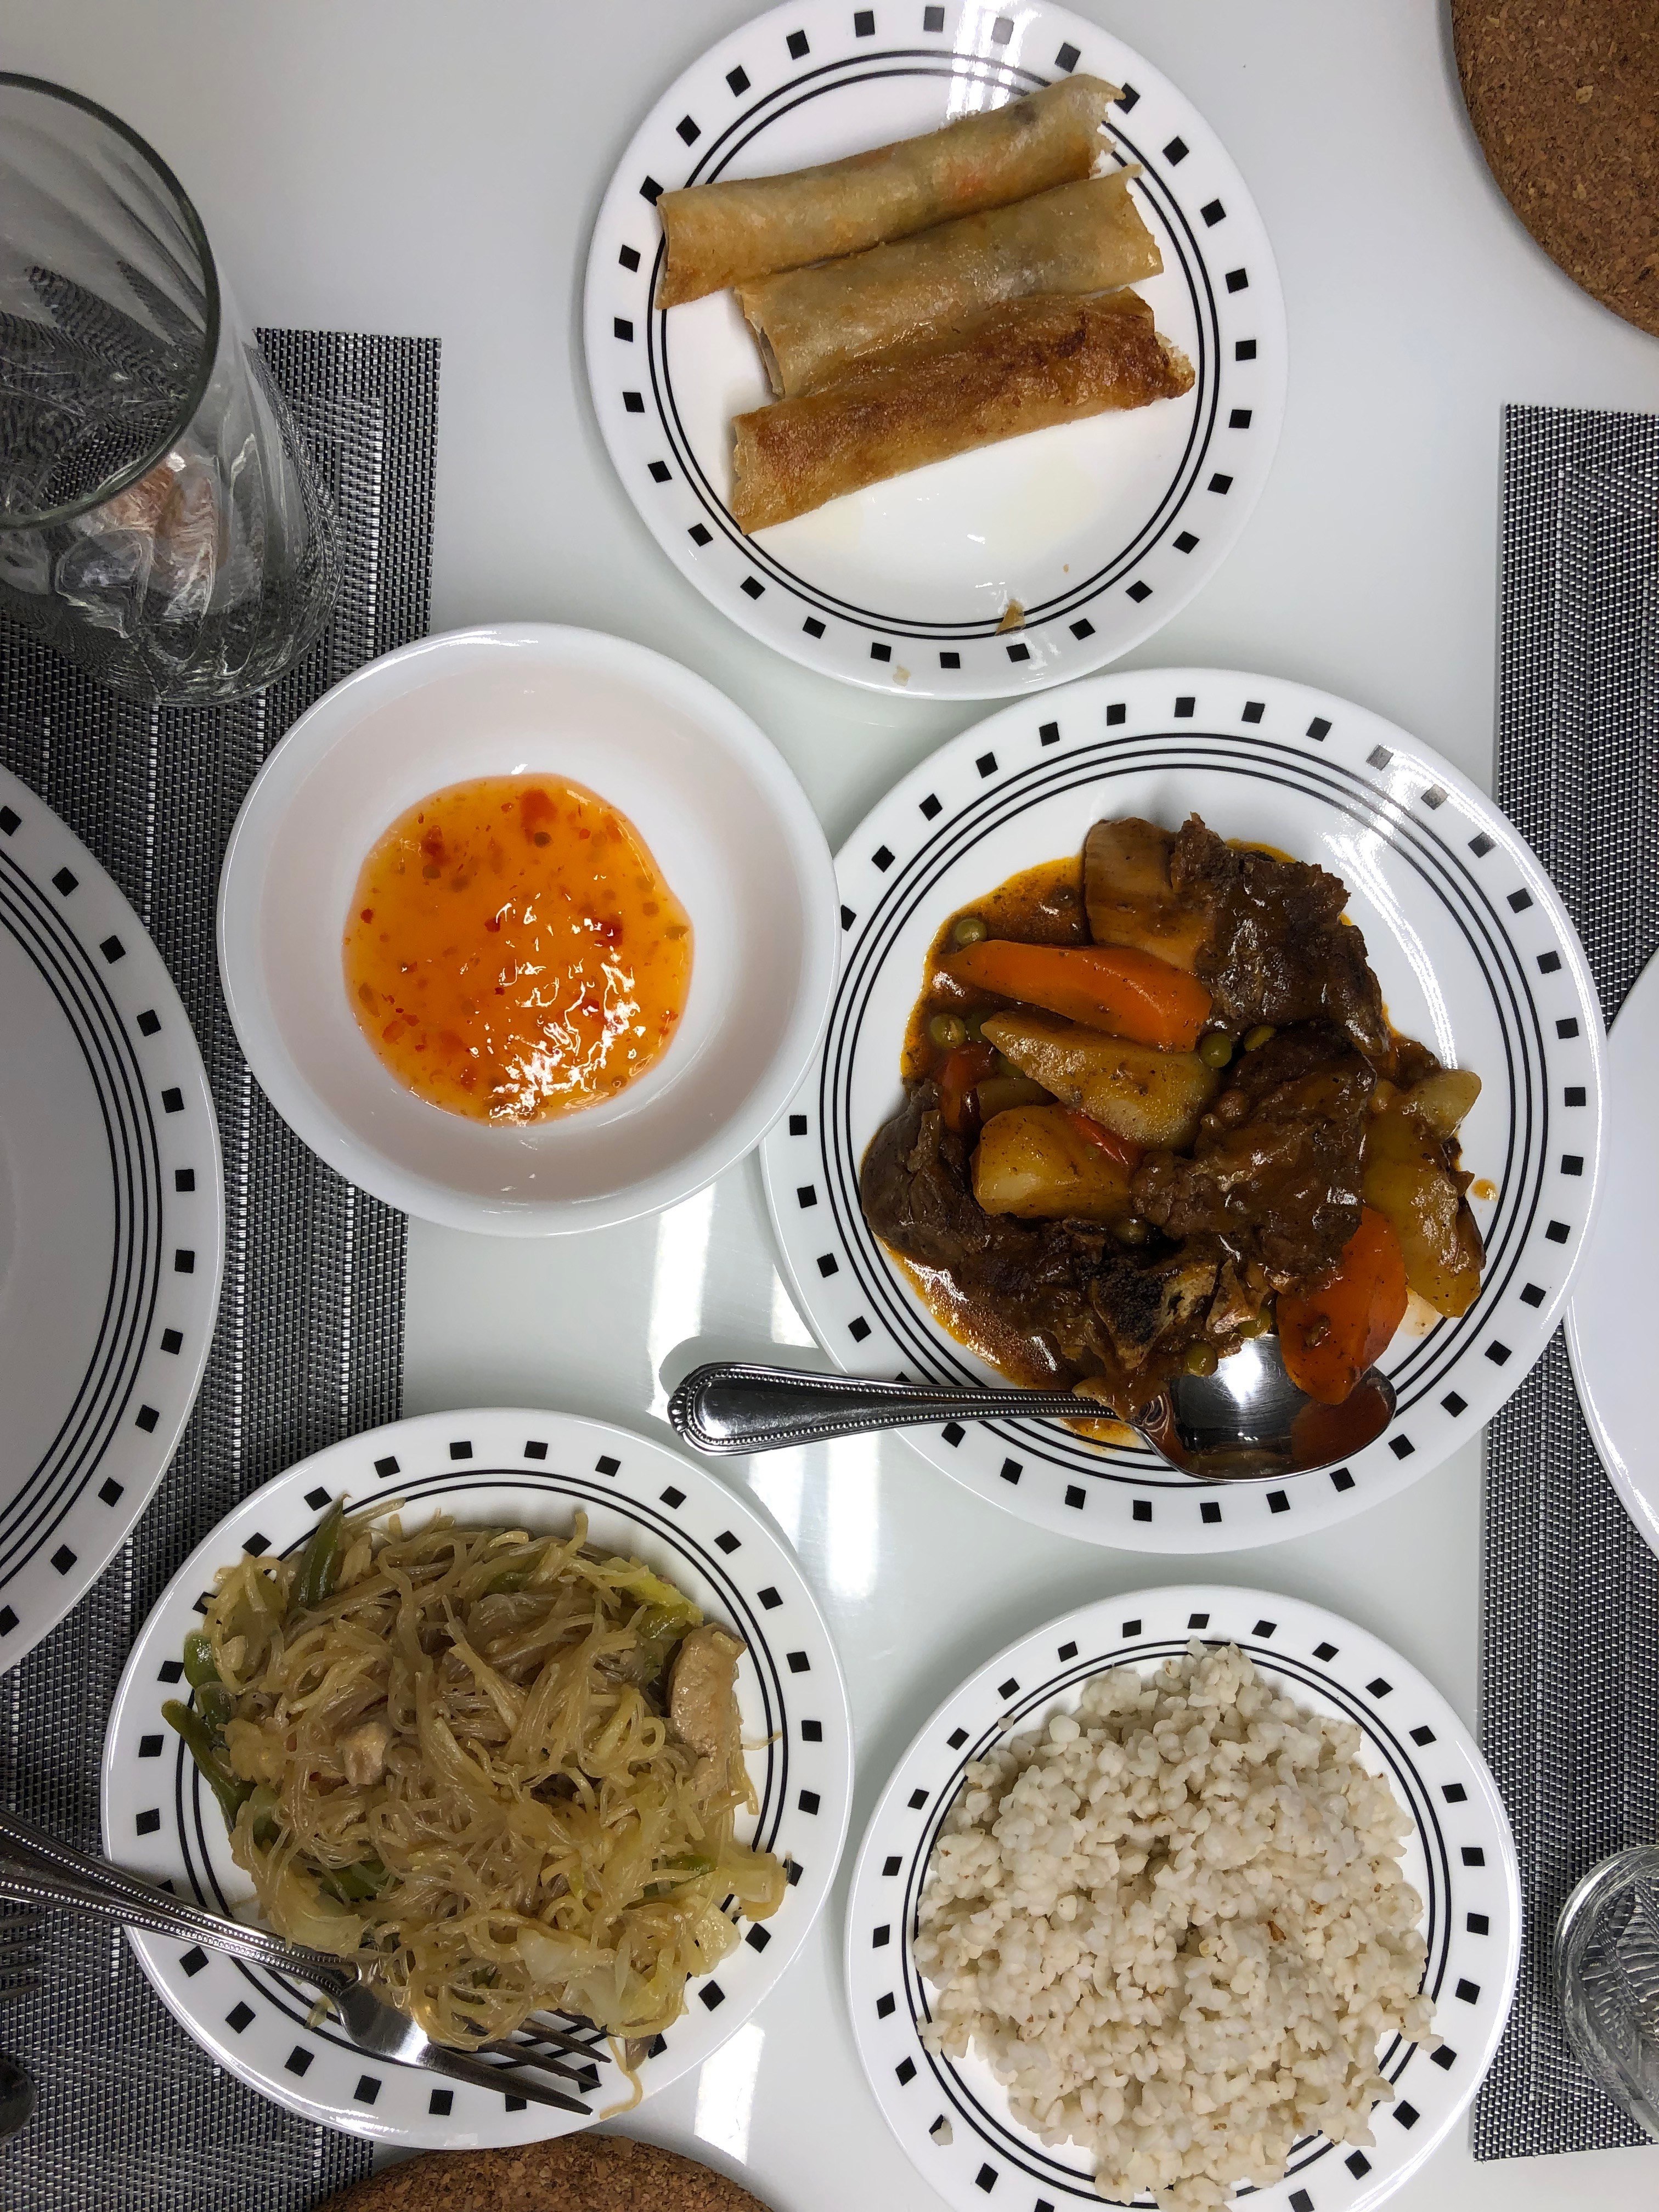 A home cooked meal Cynthia had in the Philippines: vegetable lumpia, pancit, beef afritada, jacob's tears (instead of white rice). (April 2020)